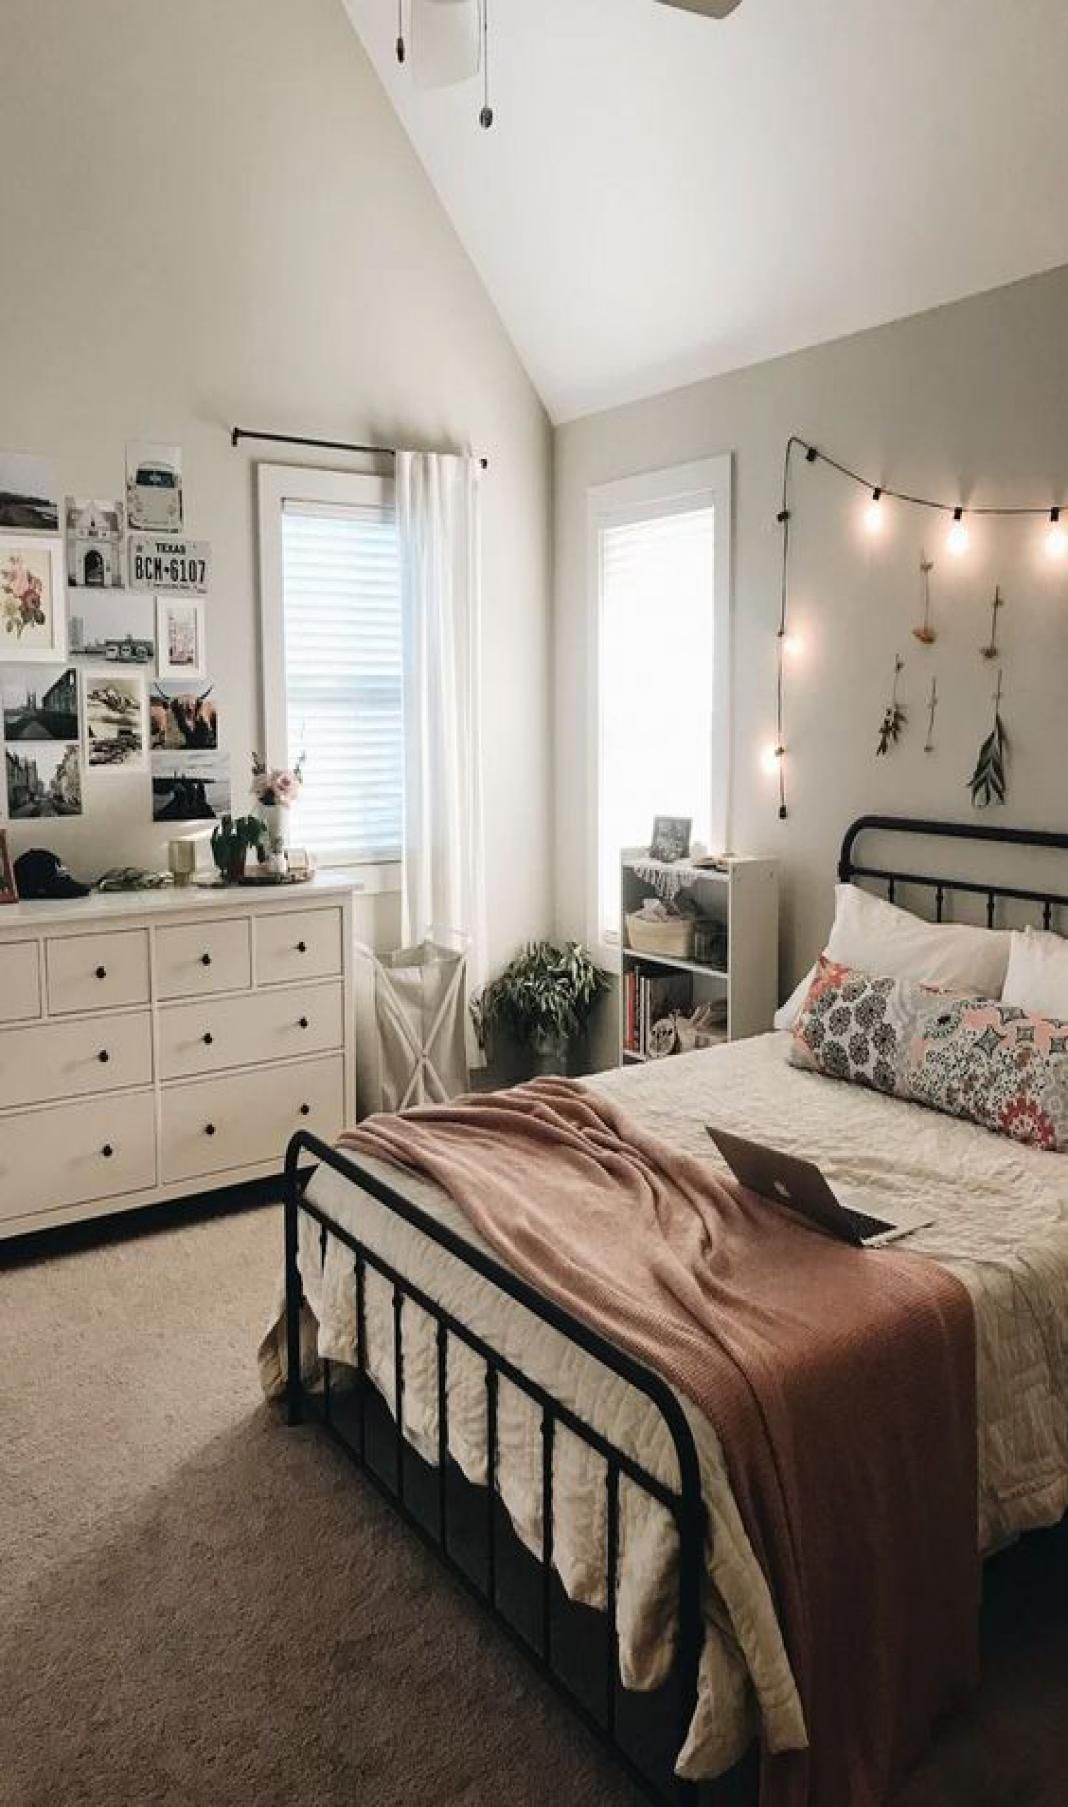 Bedroom Decor Inspiration: Unlock Your Creativity And Transform Your Space